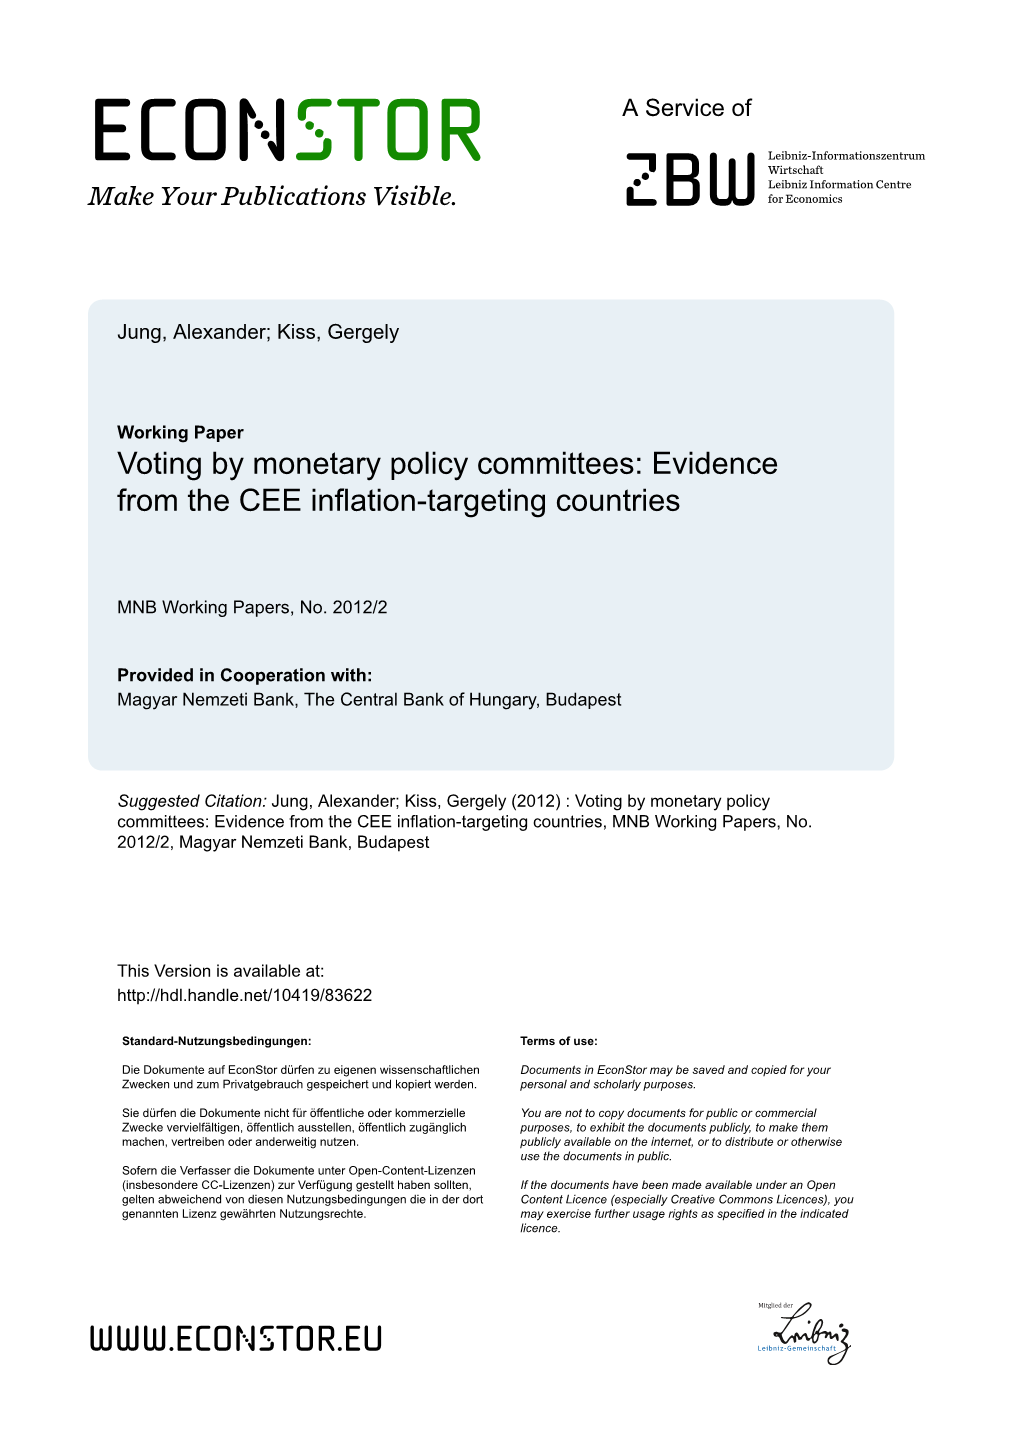 Voting by Monetary Policy Committees: Evidence from the CEE Inflation-Targeting Countries